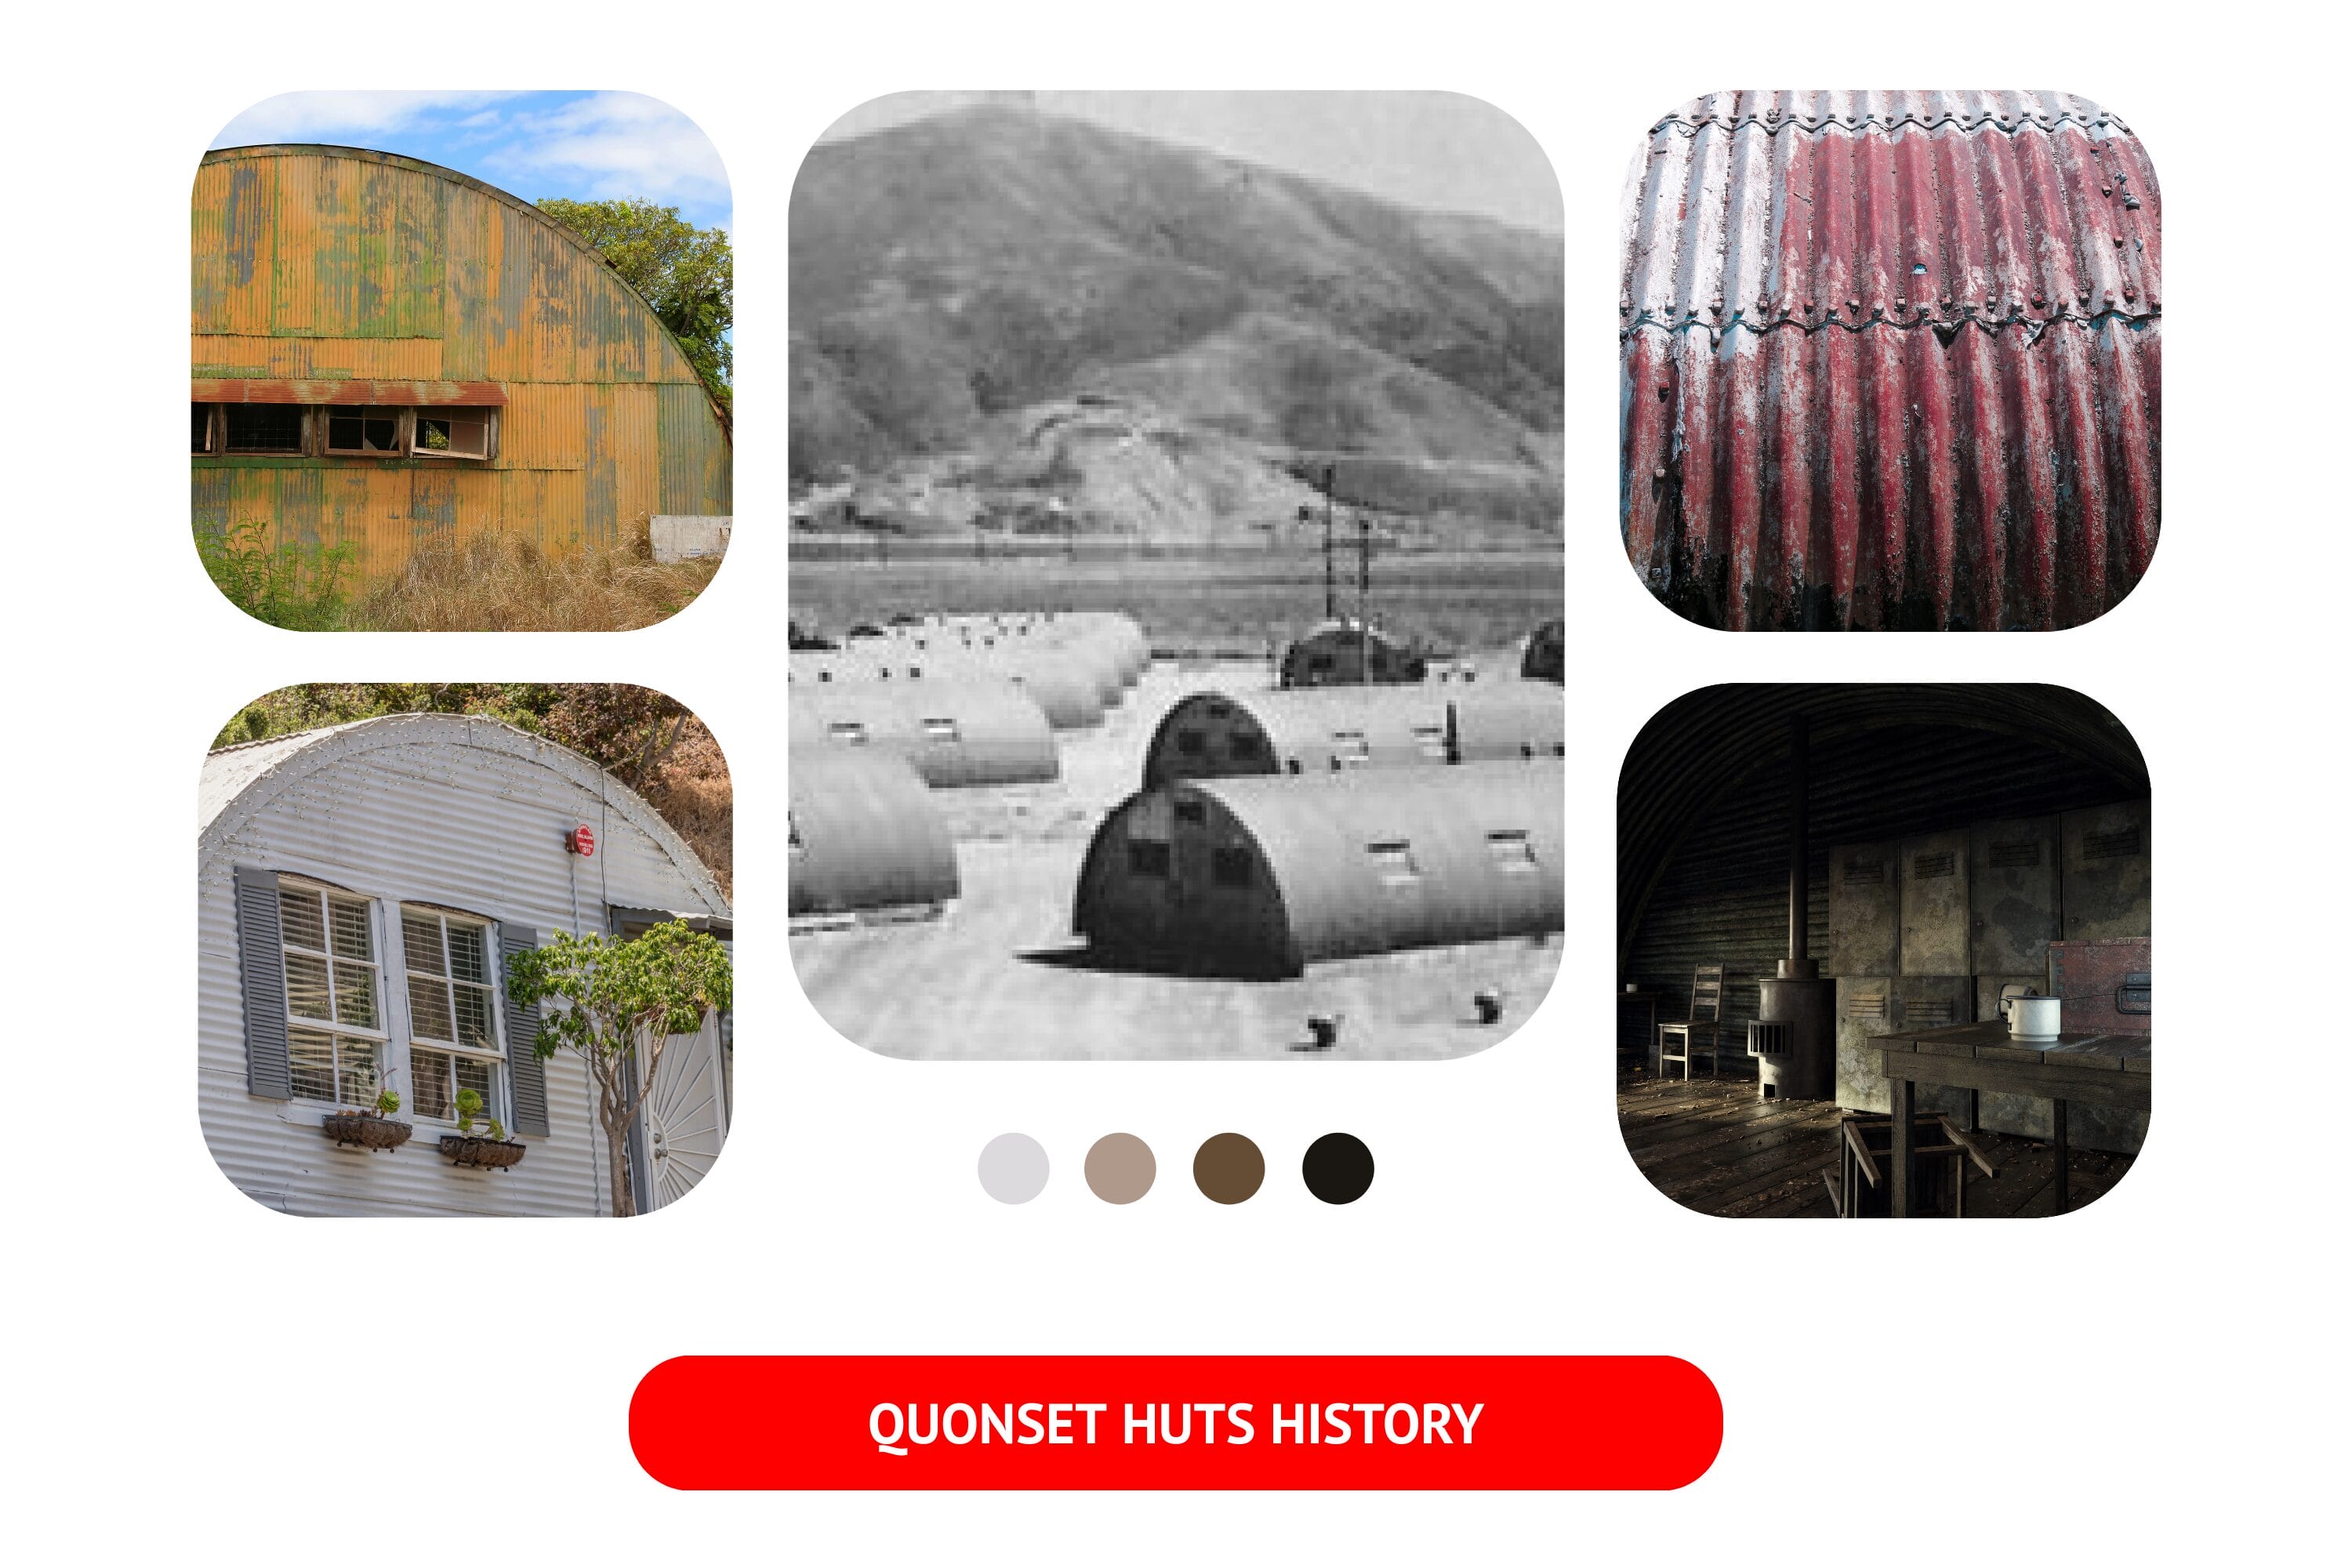 Quonset huts have a fascinating history. They were originally developed during World War II as a quick and affordable housing solution for military personnel.